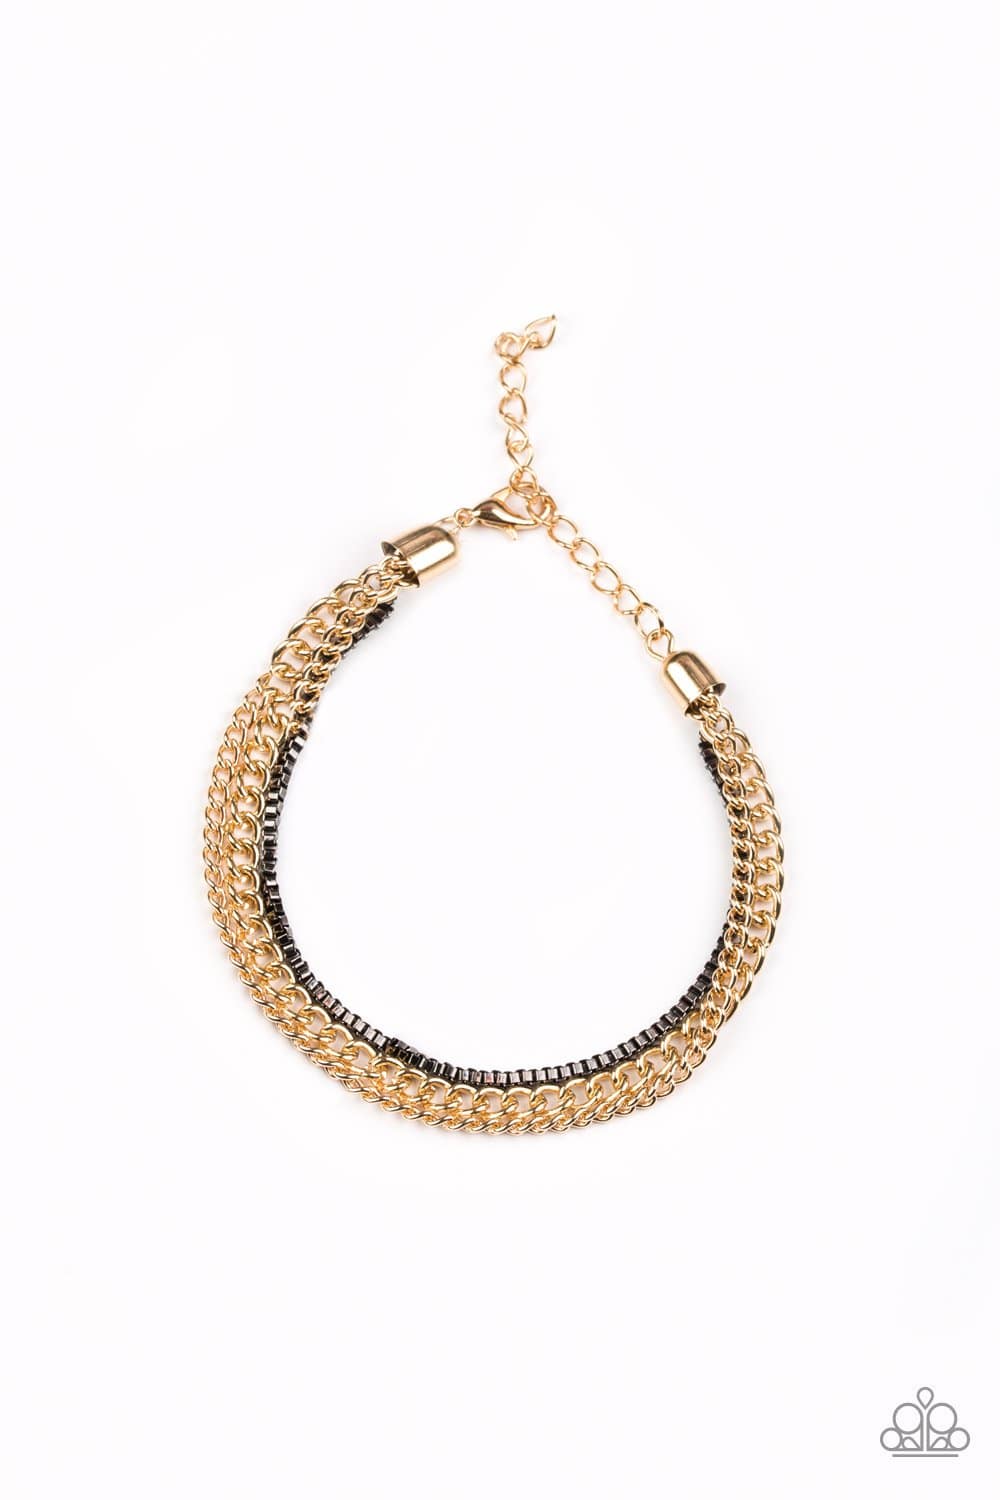 B211 - Industrial Icon Gold Bracelet by Paparazzi Accessories on Fancy5Fashion.com